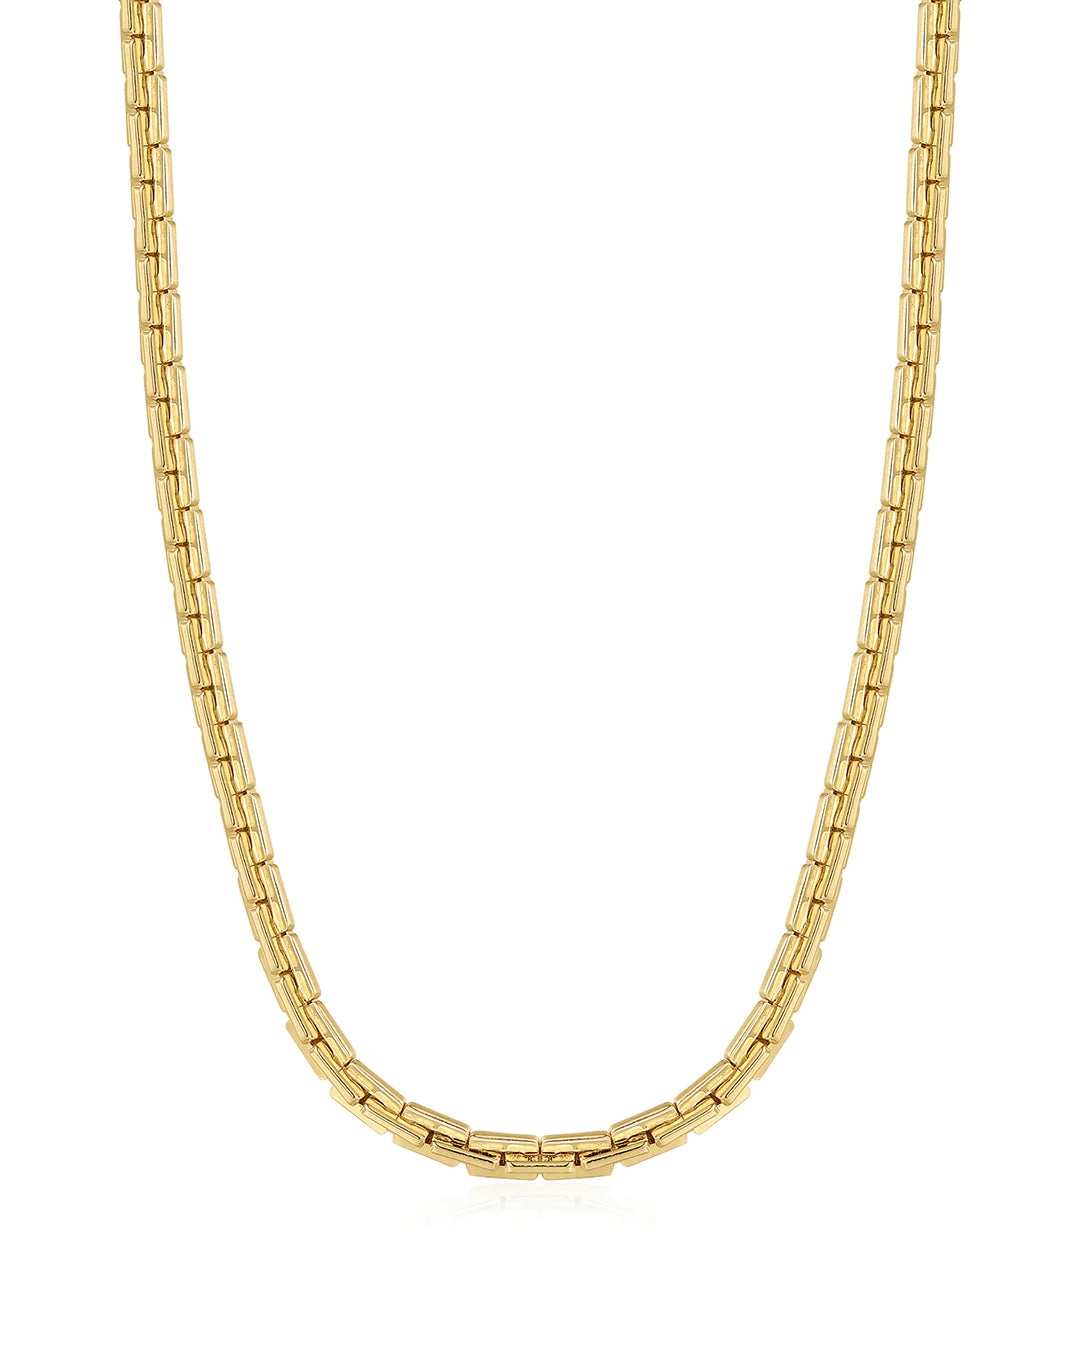 The Chloe Chain Necklace